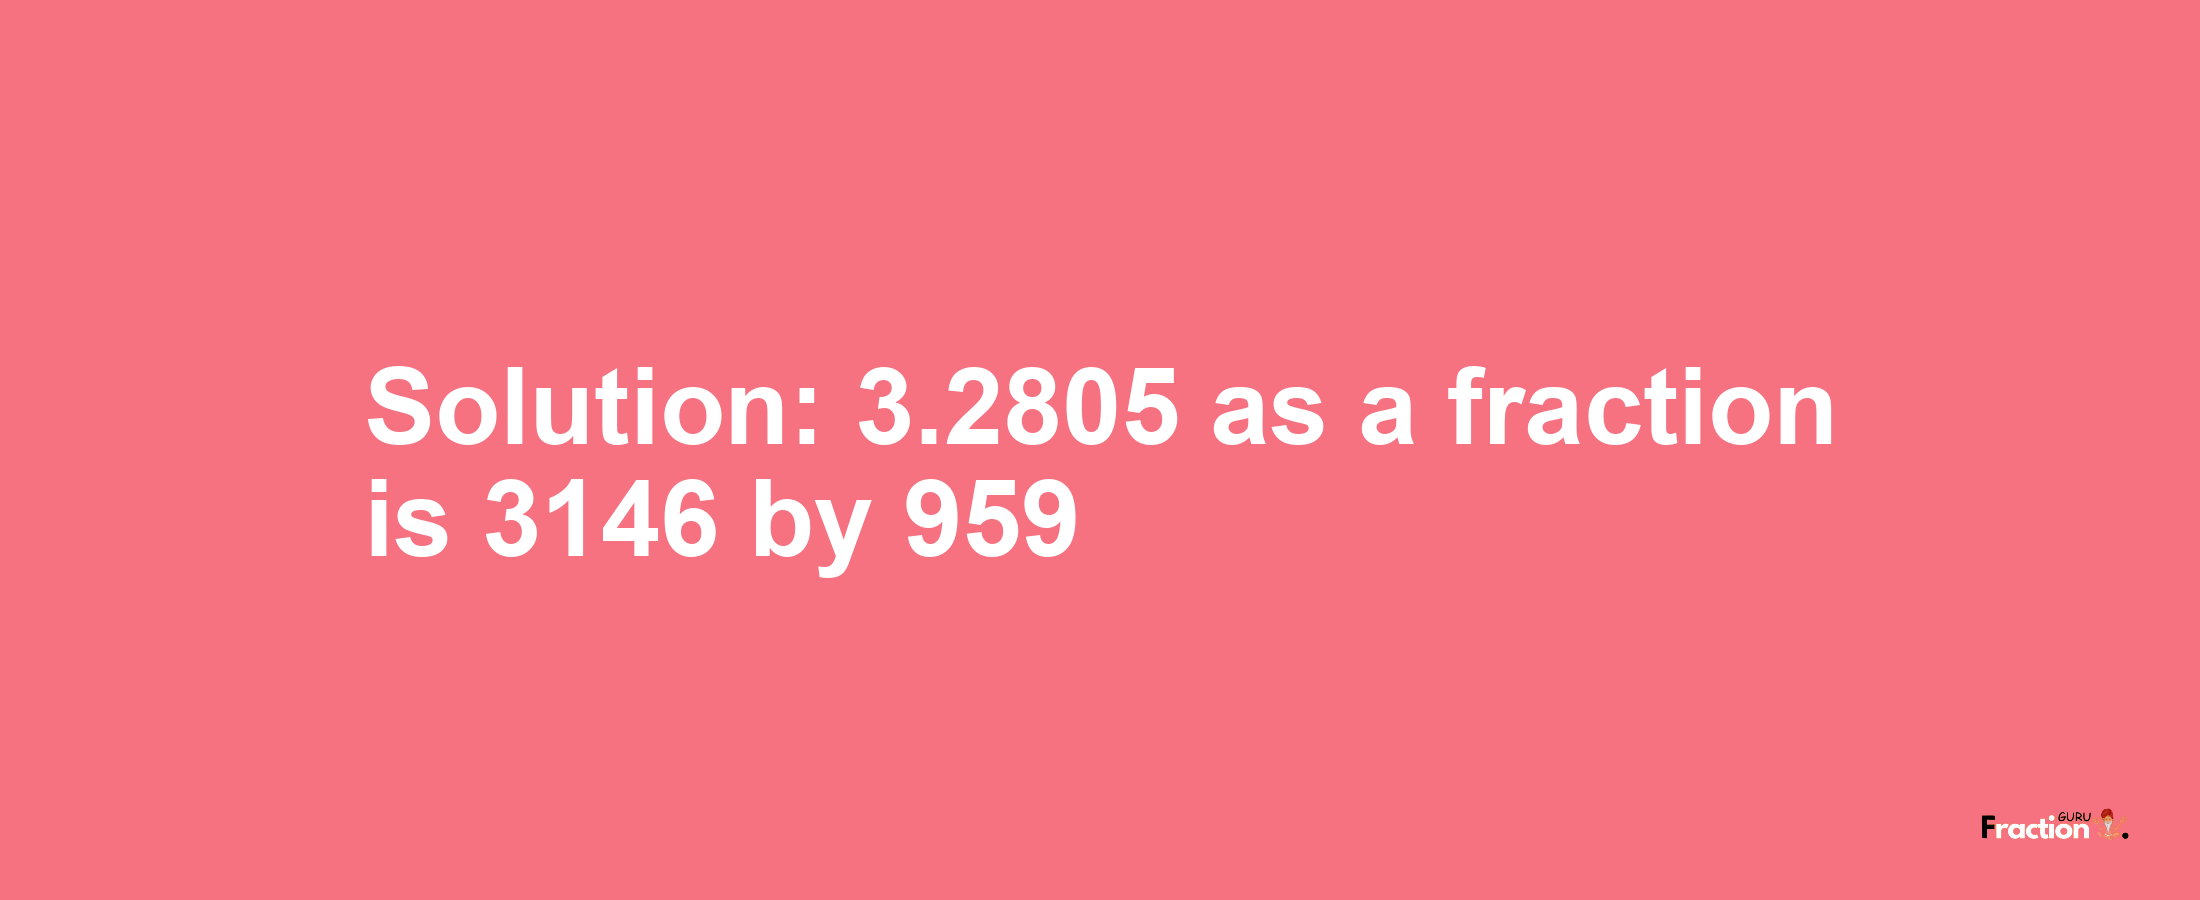 Solution:3.2805 as a fraction is 3146/959